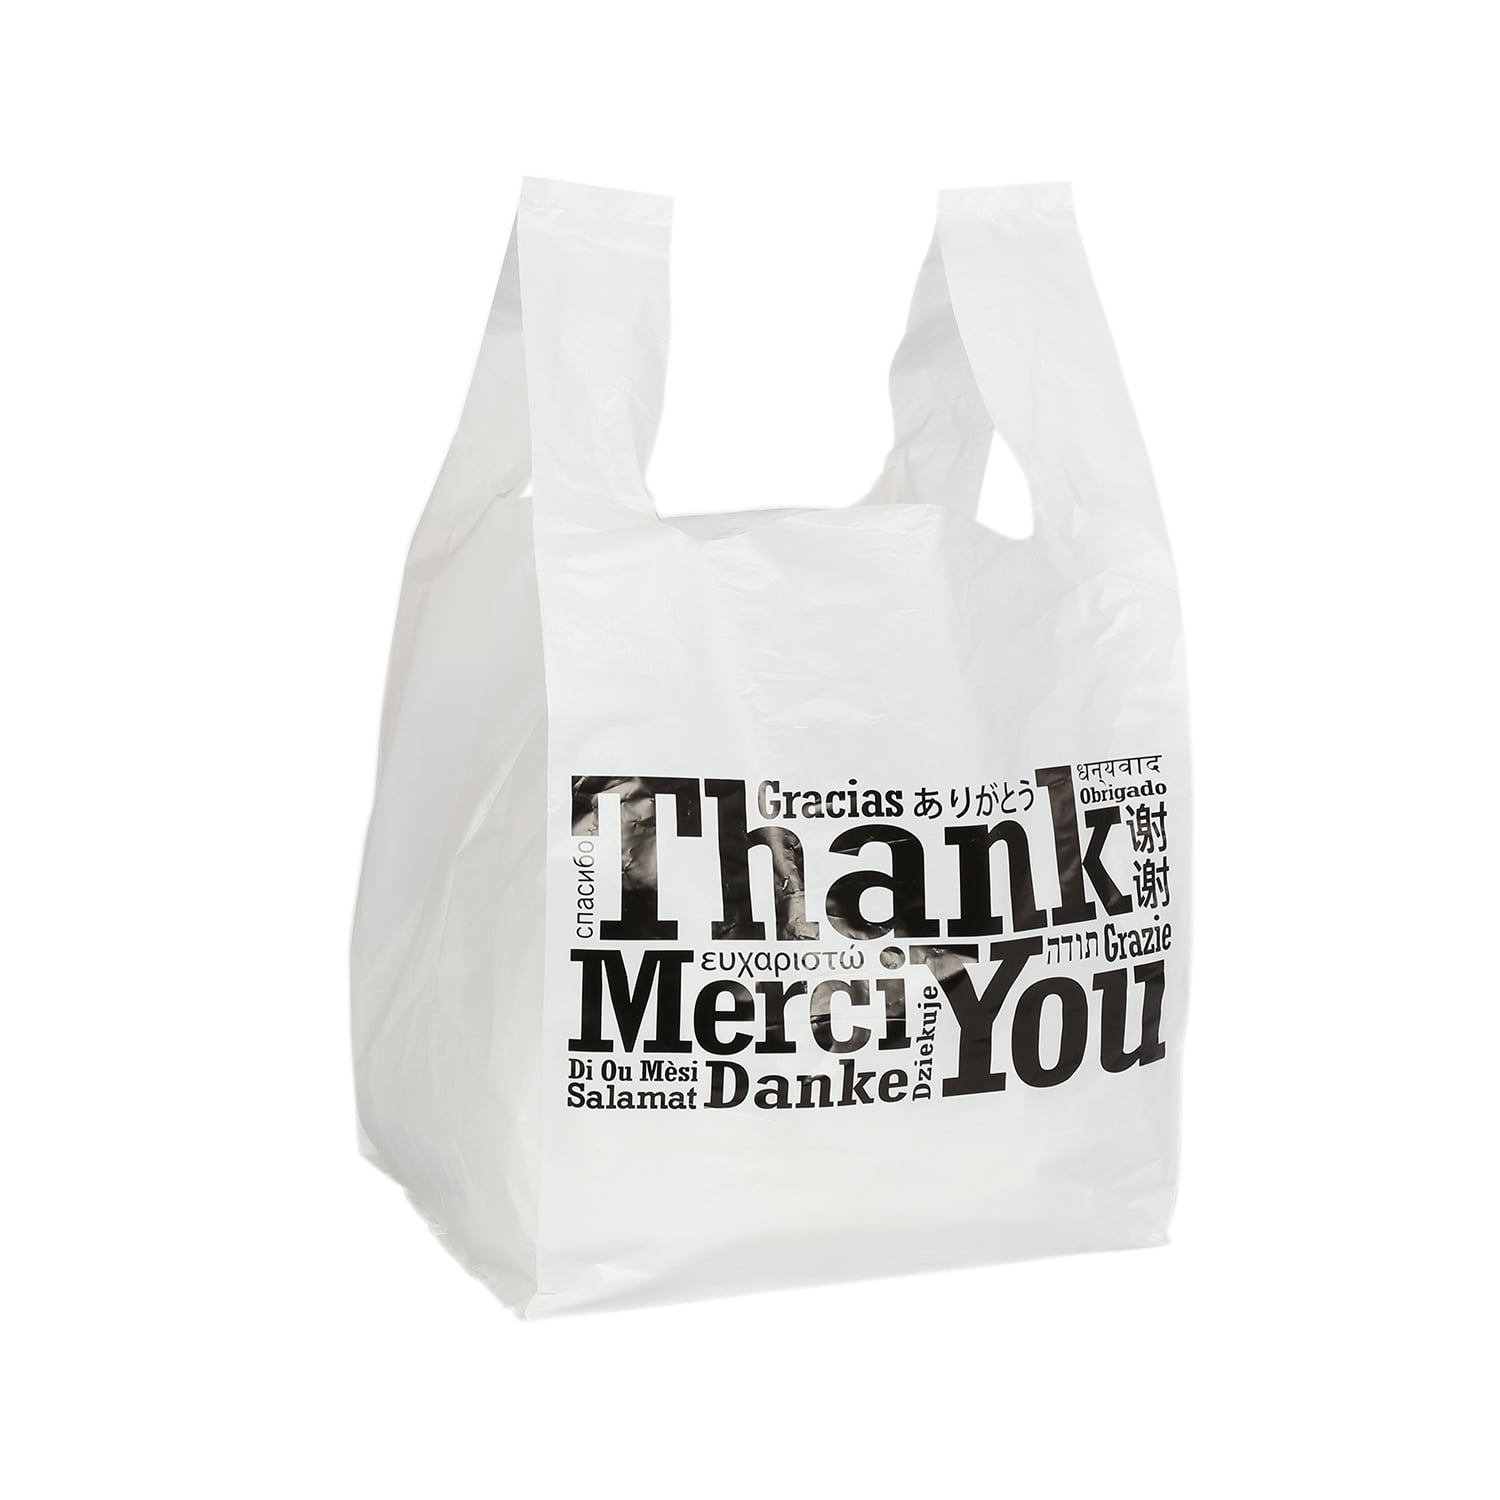 Case of 250 Royal Recyclable Plastic Shopping Bags with Flat Bottoms MultilingualThank You Design 11.5 x 10.5 x 19 Inches 